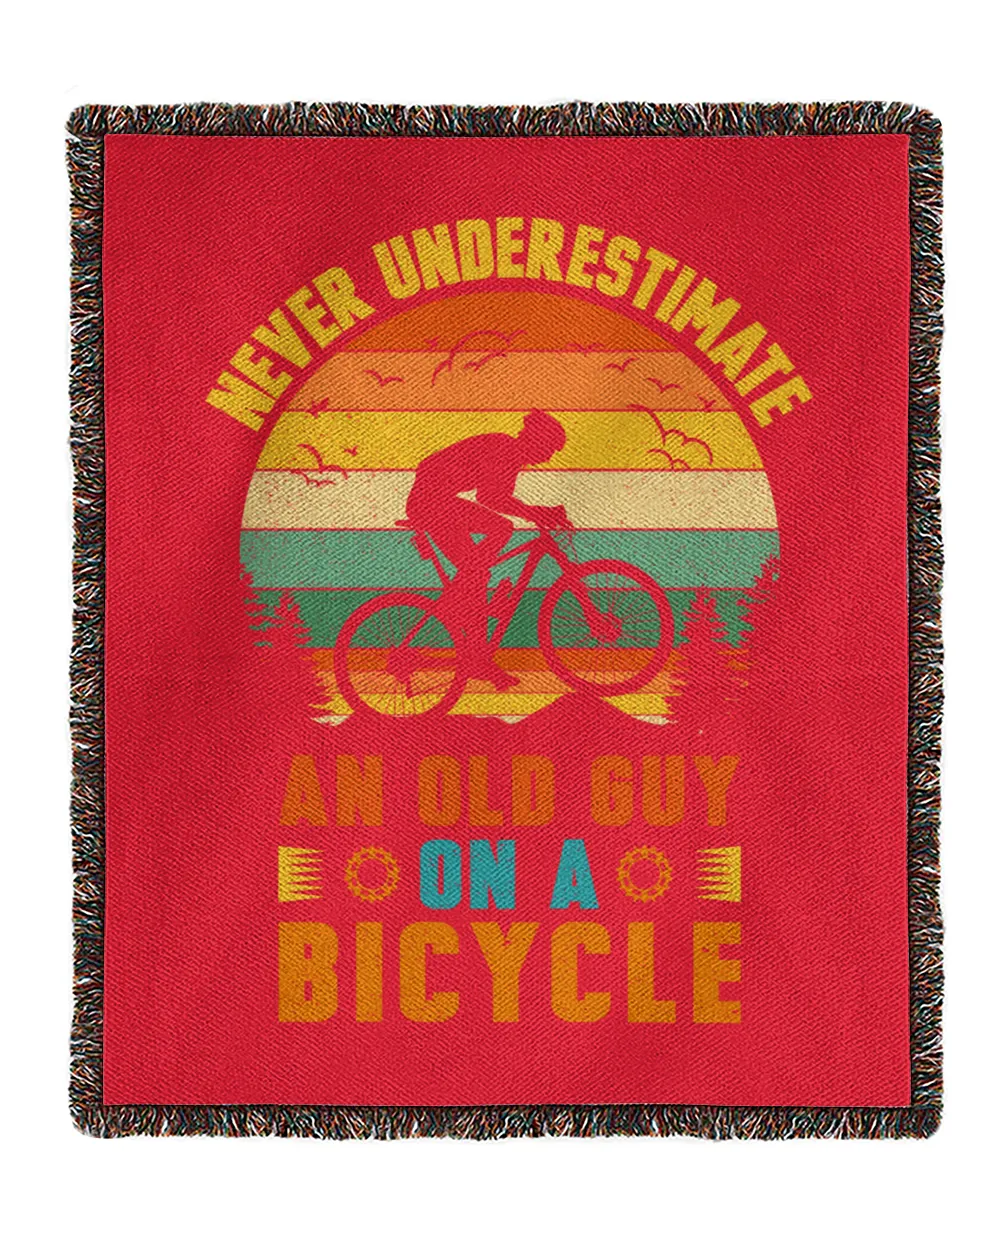 Never Underestimate An Old Guy On A Bicycle